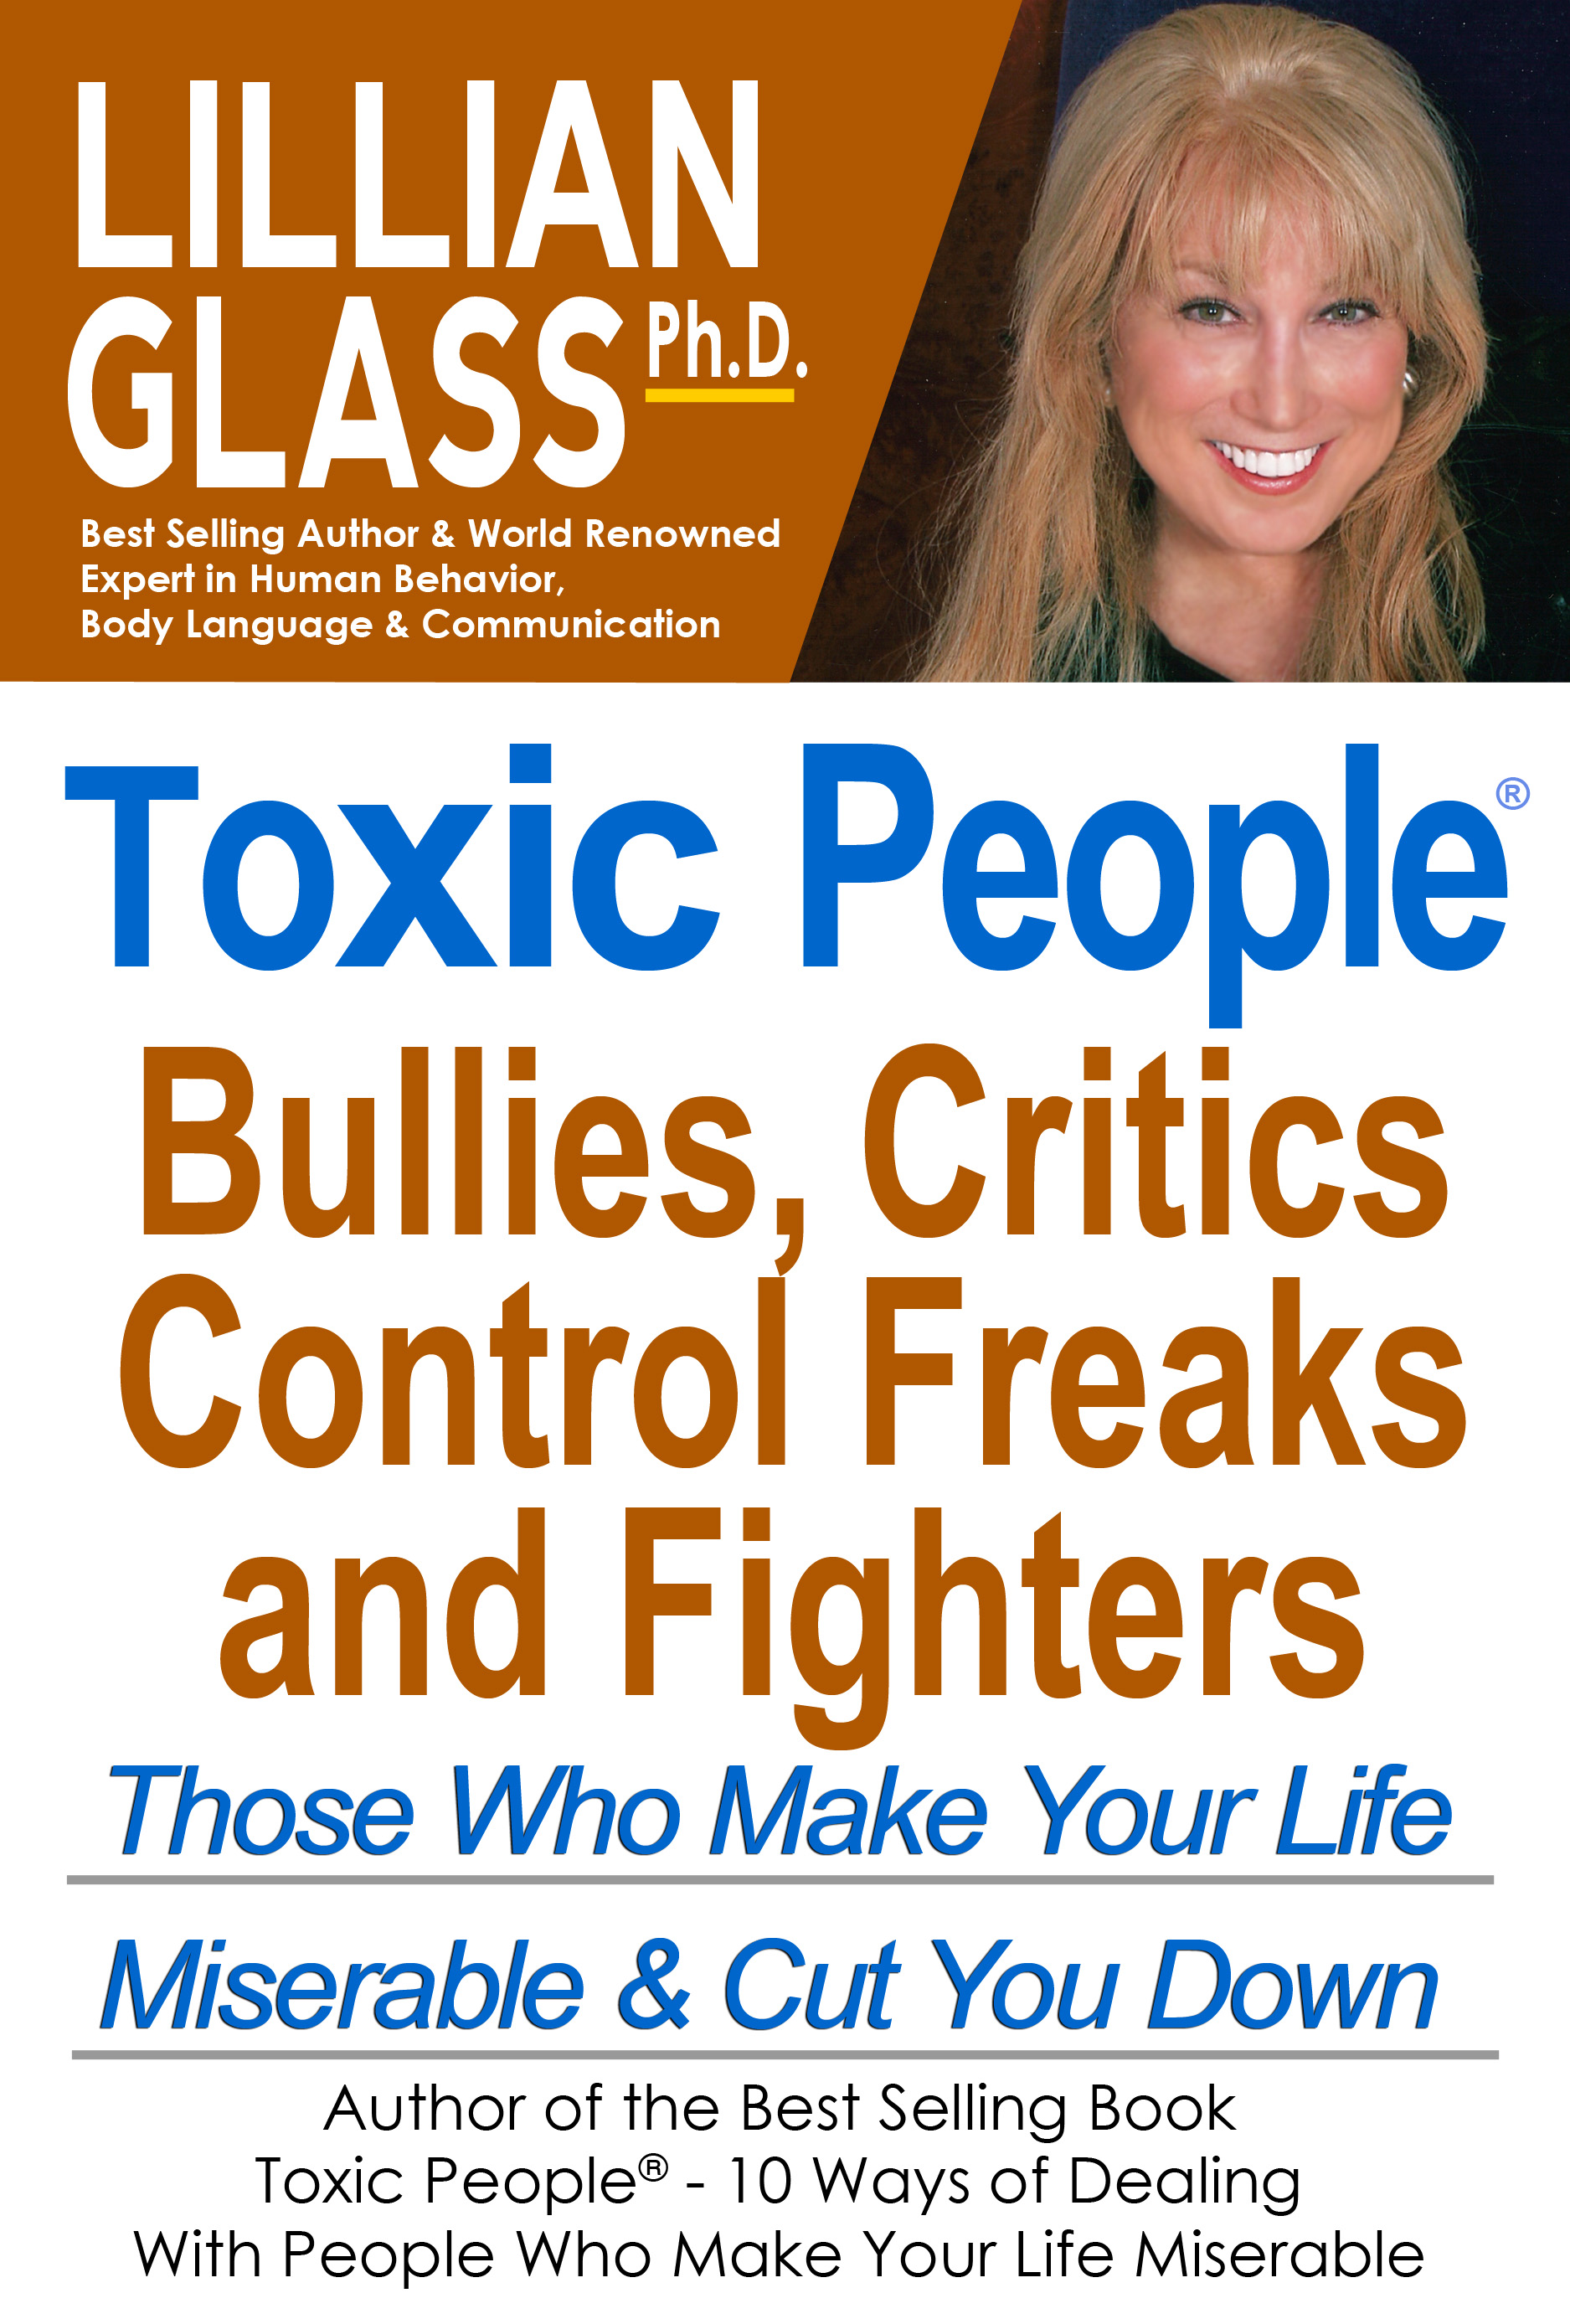 Toxic People: Bullies, Critics, Control Freaks, and Fighters - Audio